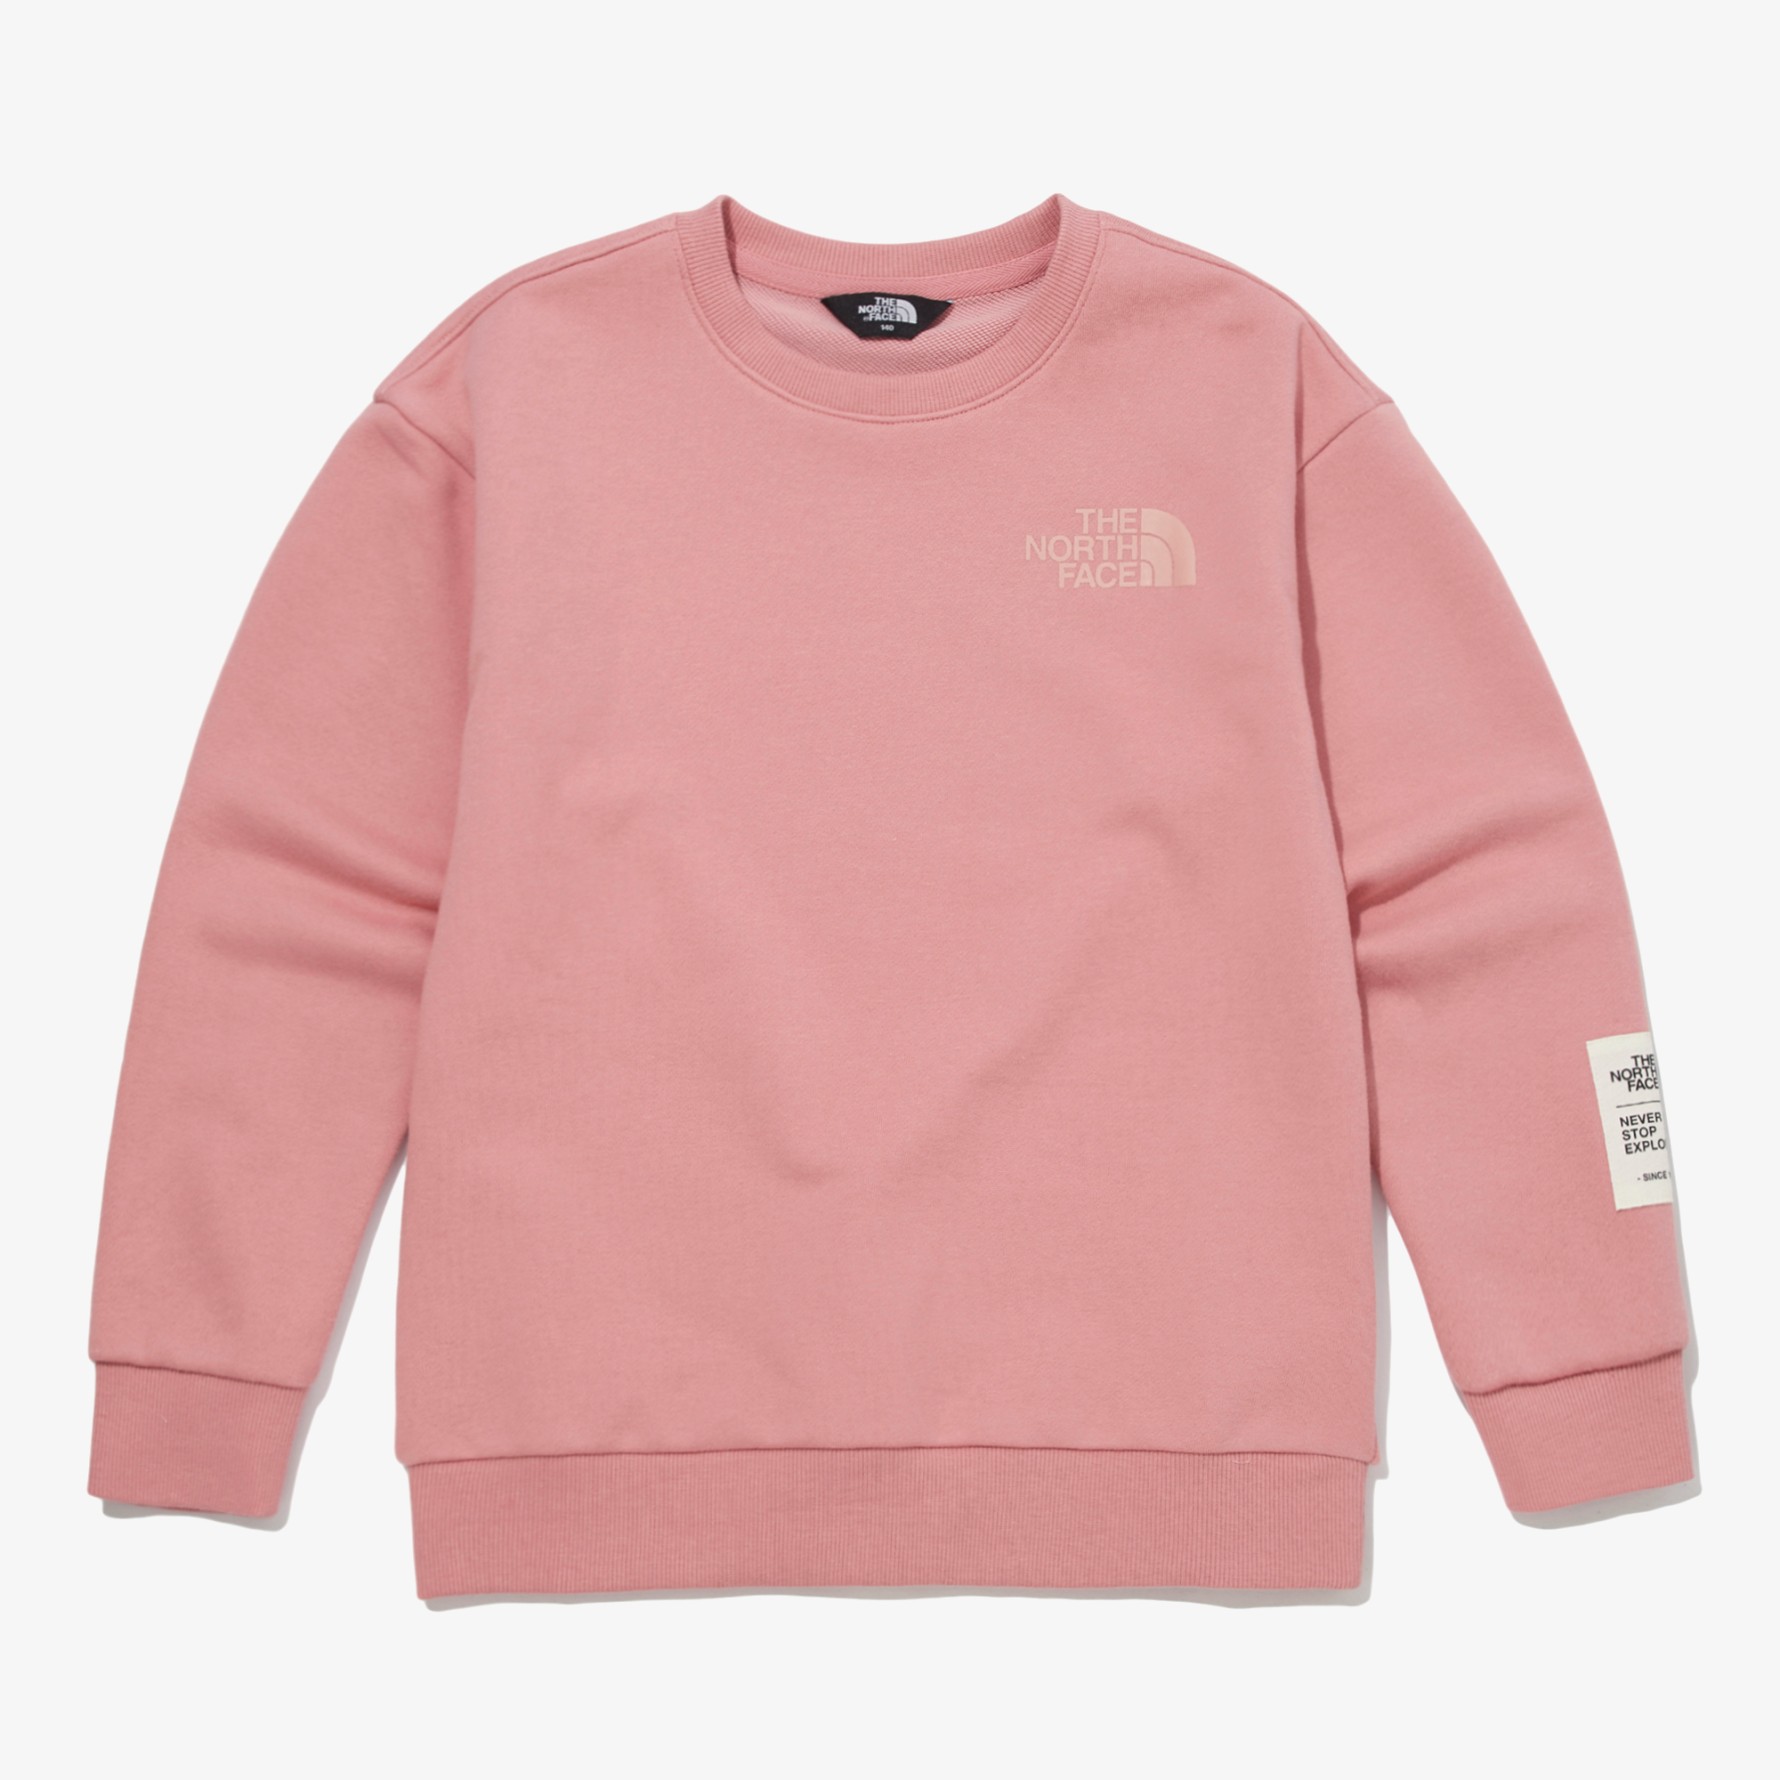 THE NORTH FACE-K’S ESSENTIAL SWEATSHIRTS (PINK)